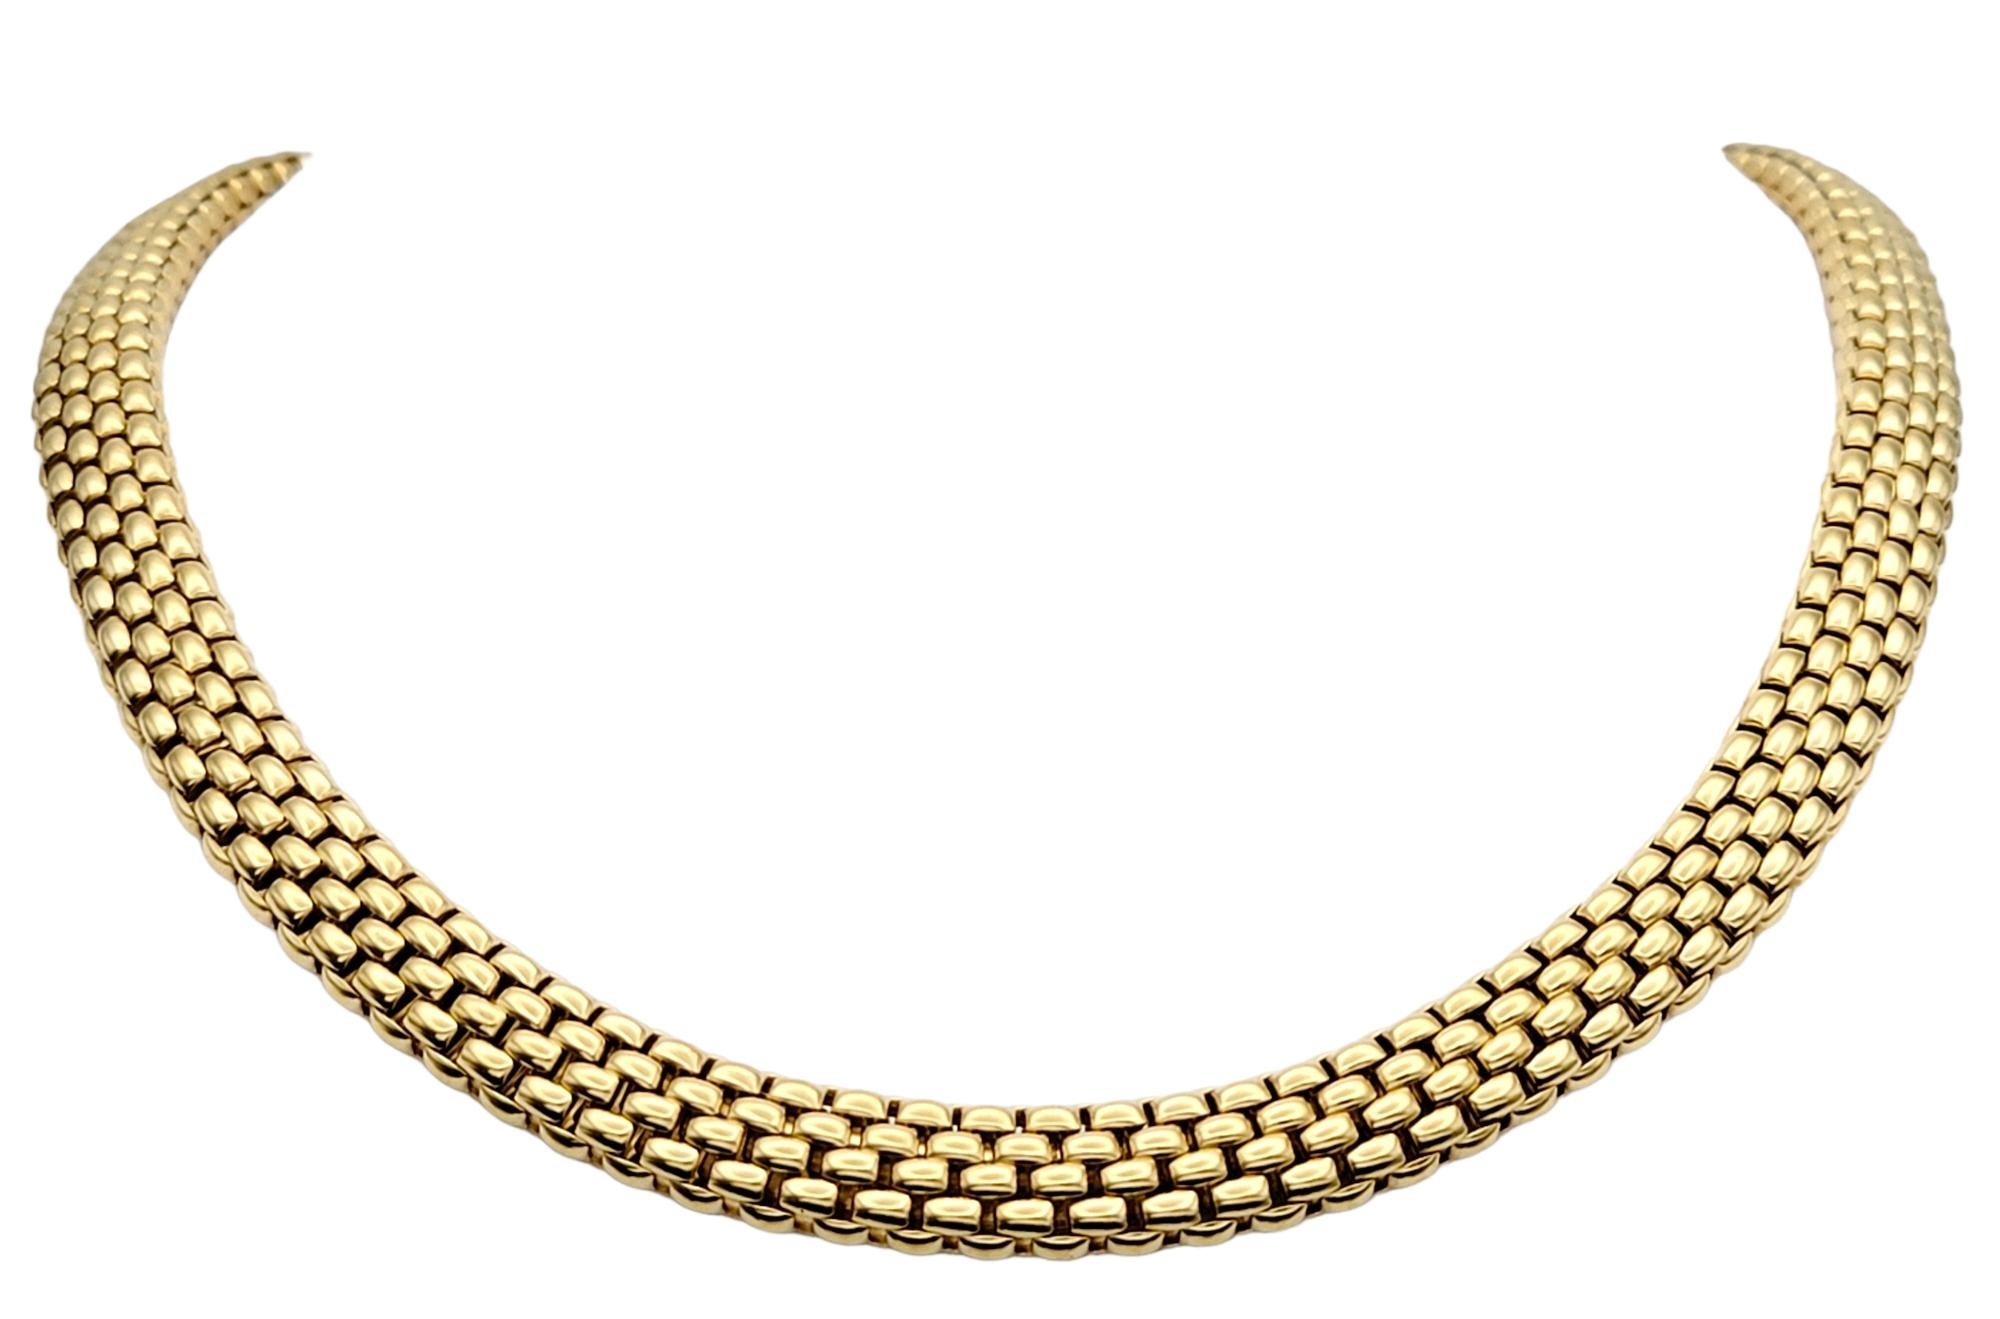 Introducing a truly exquisite piece of jewelry, the Fope Profili Collection woven mesh link choker necklace. Immerse yourself in the allure of unparalleled elegance with this stunning creation.

Crafted with precision and passion, this 16.5 inch